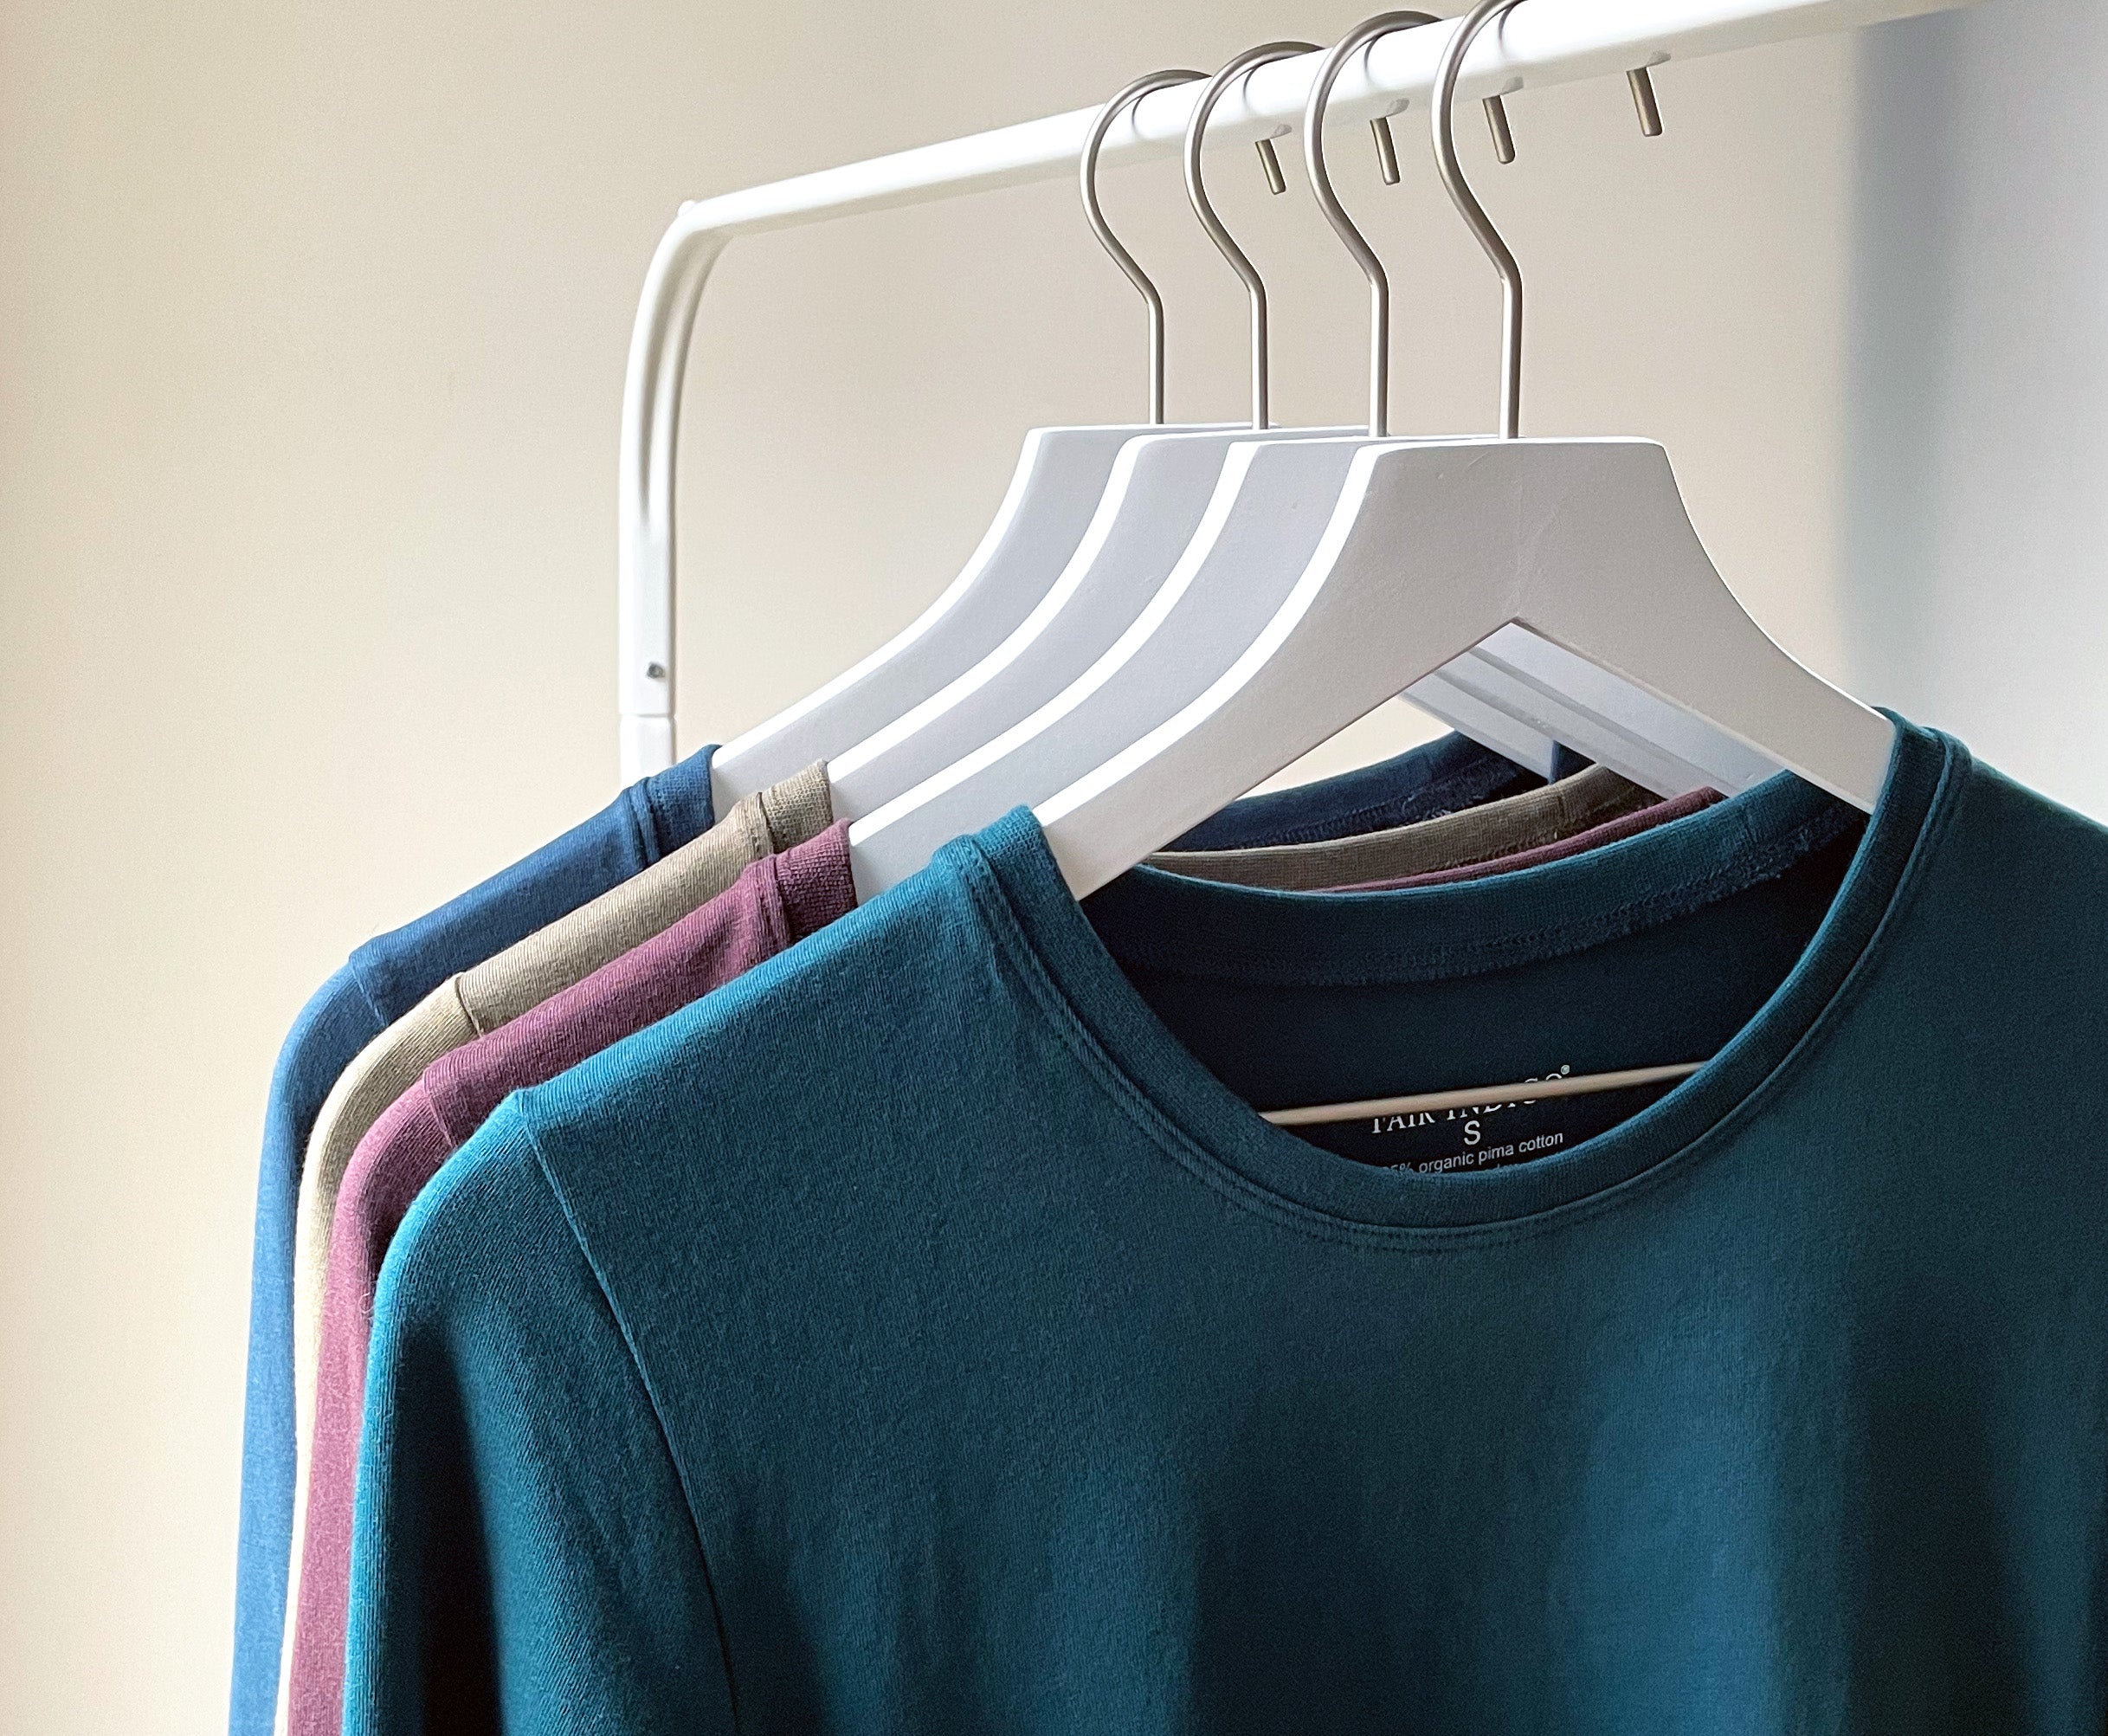 How to identify high-quality cotton clothing